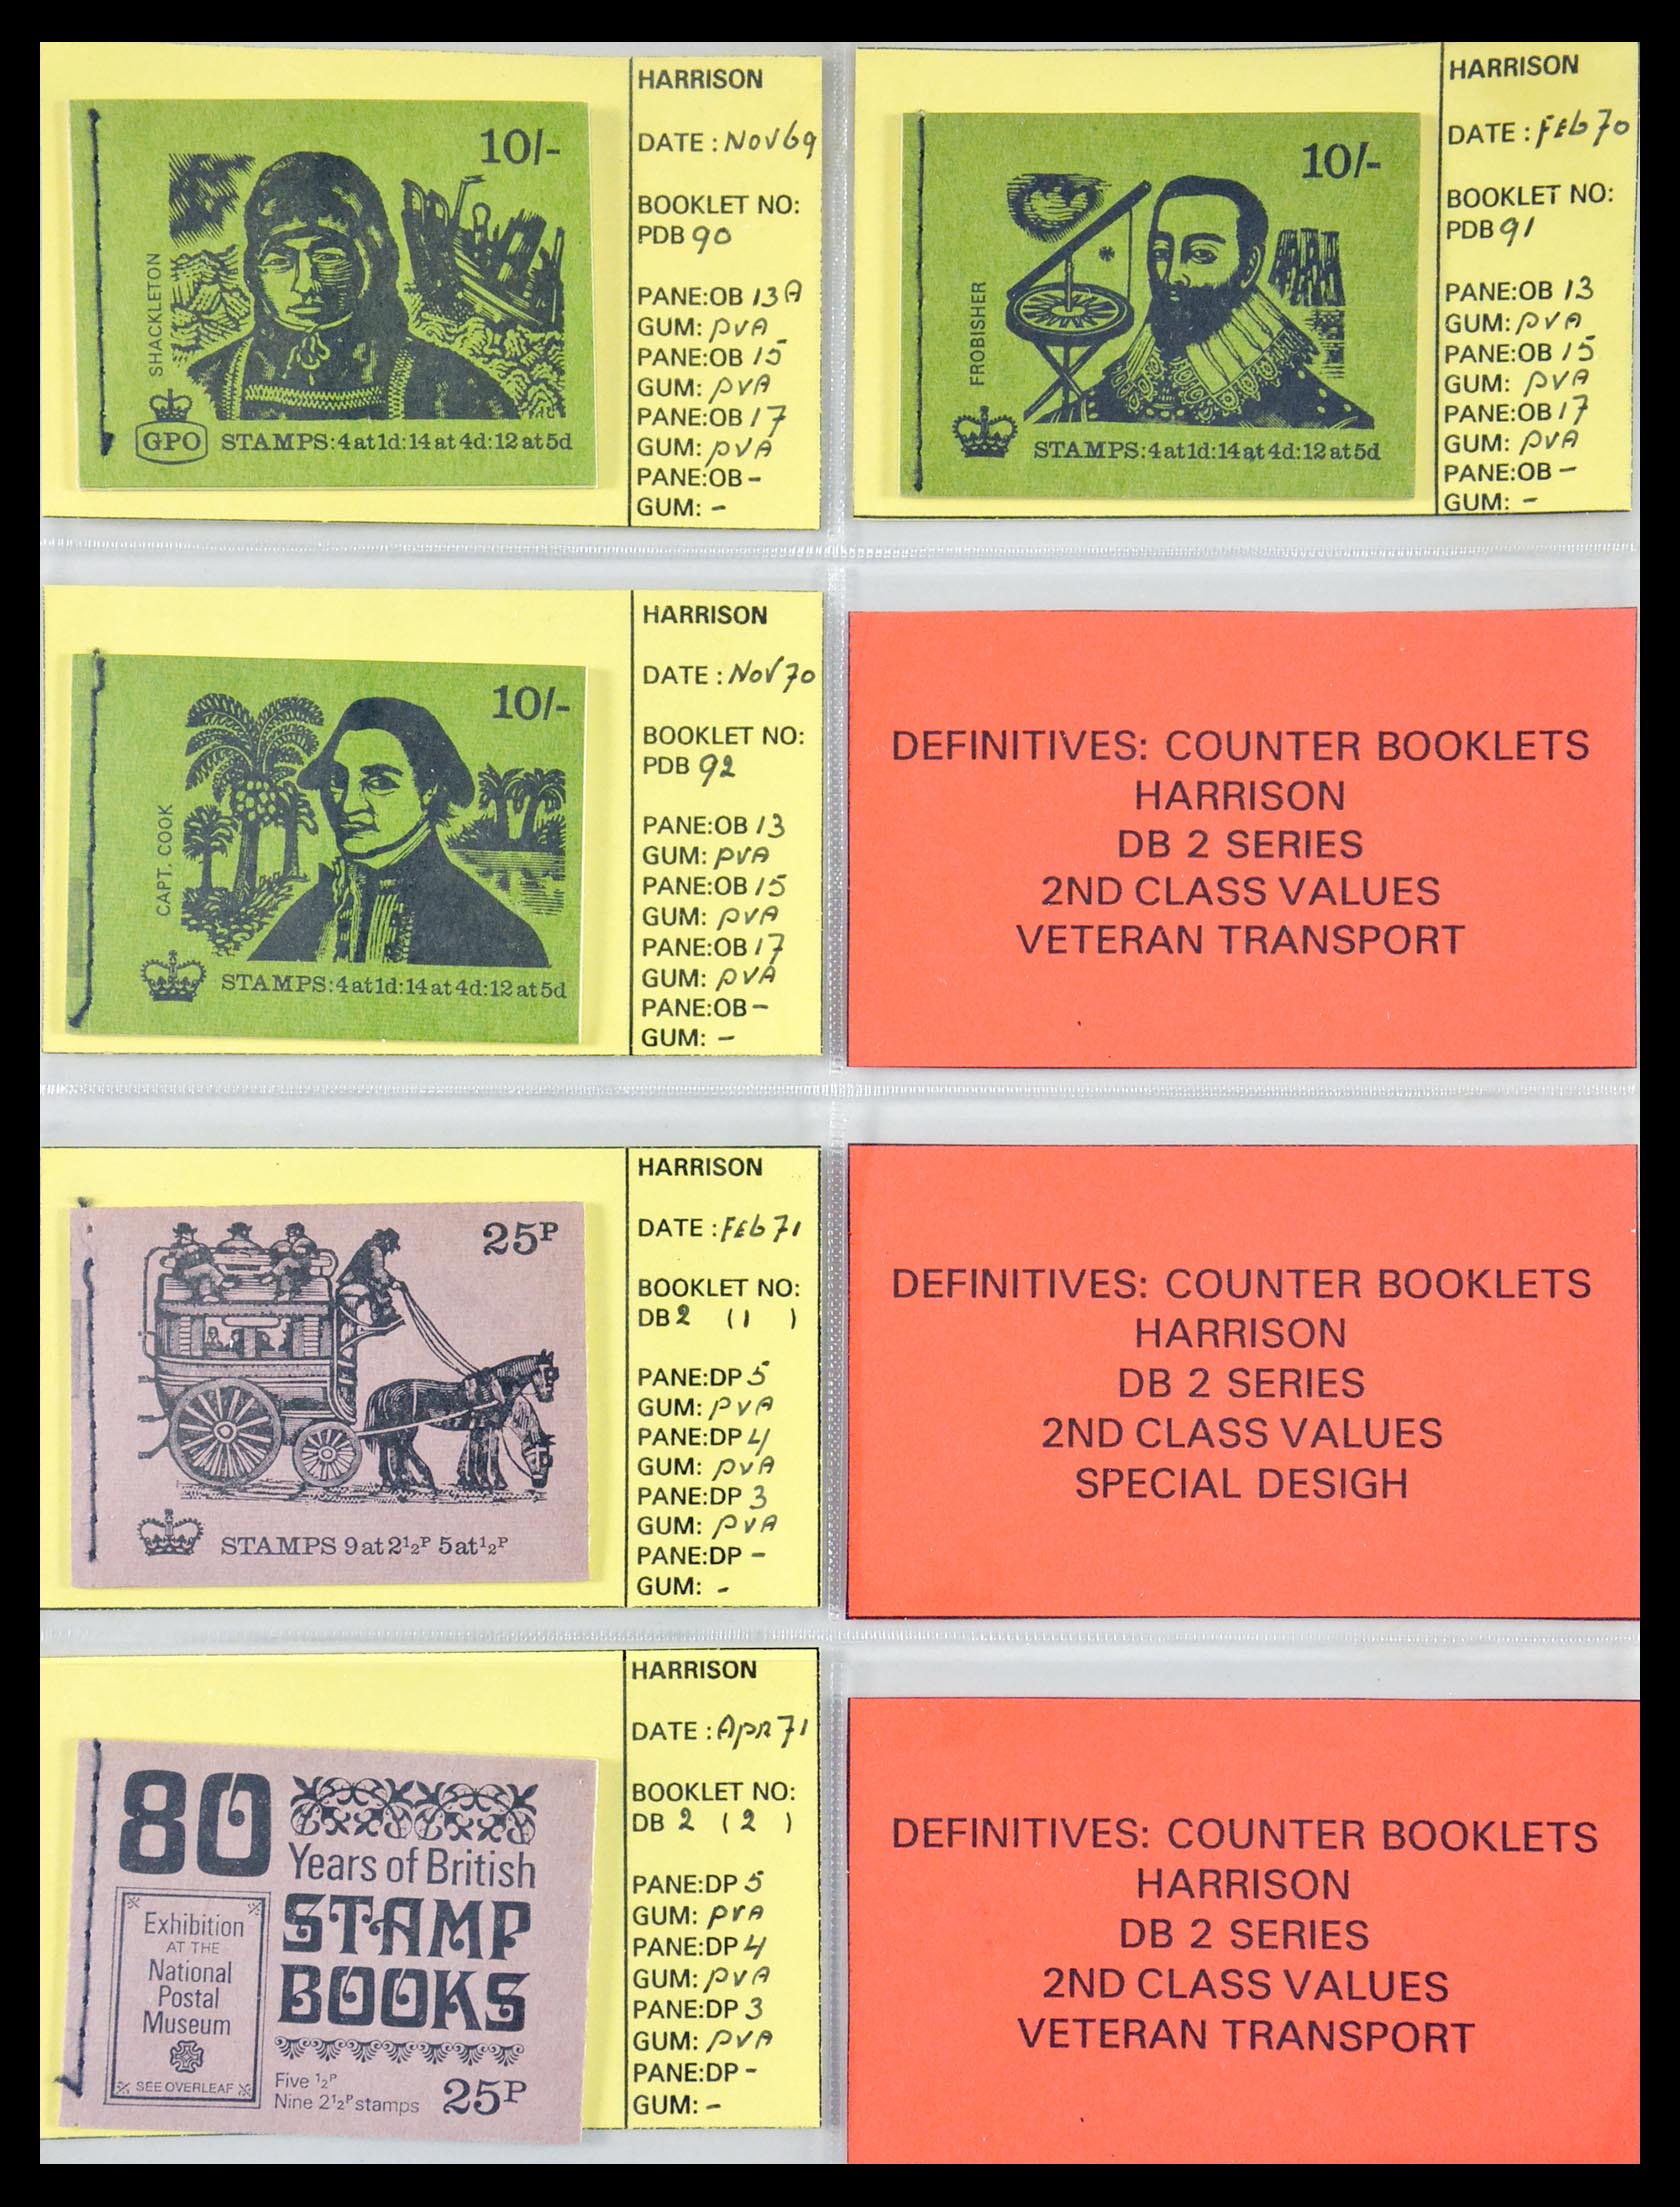 29755 009 - 29755 Great Britain stamp booklets 1968-1977.